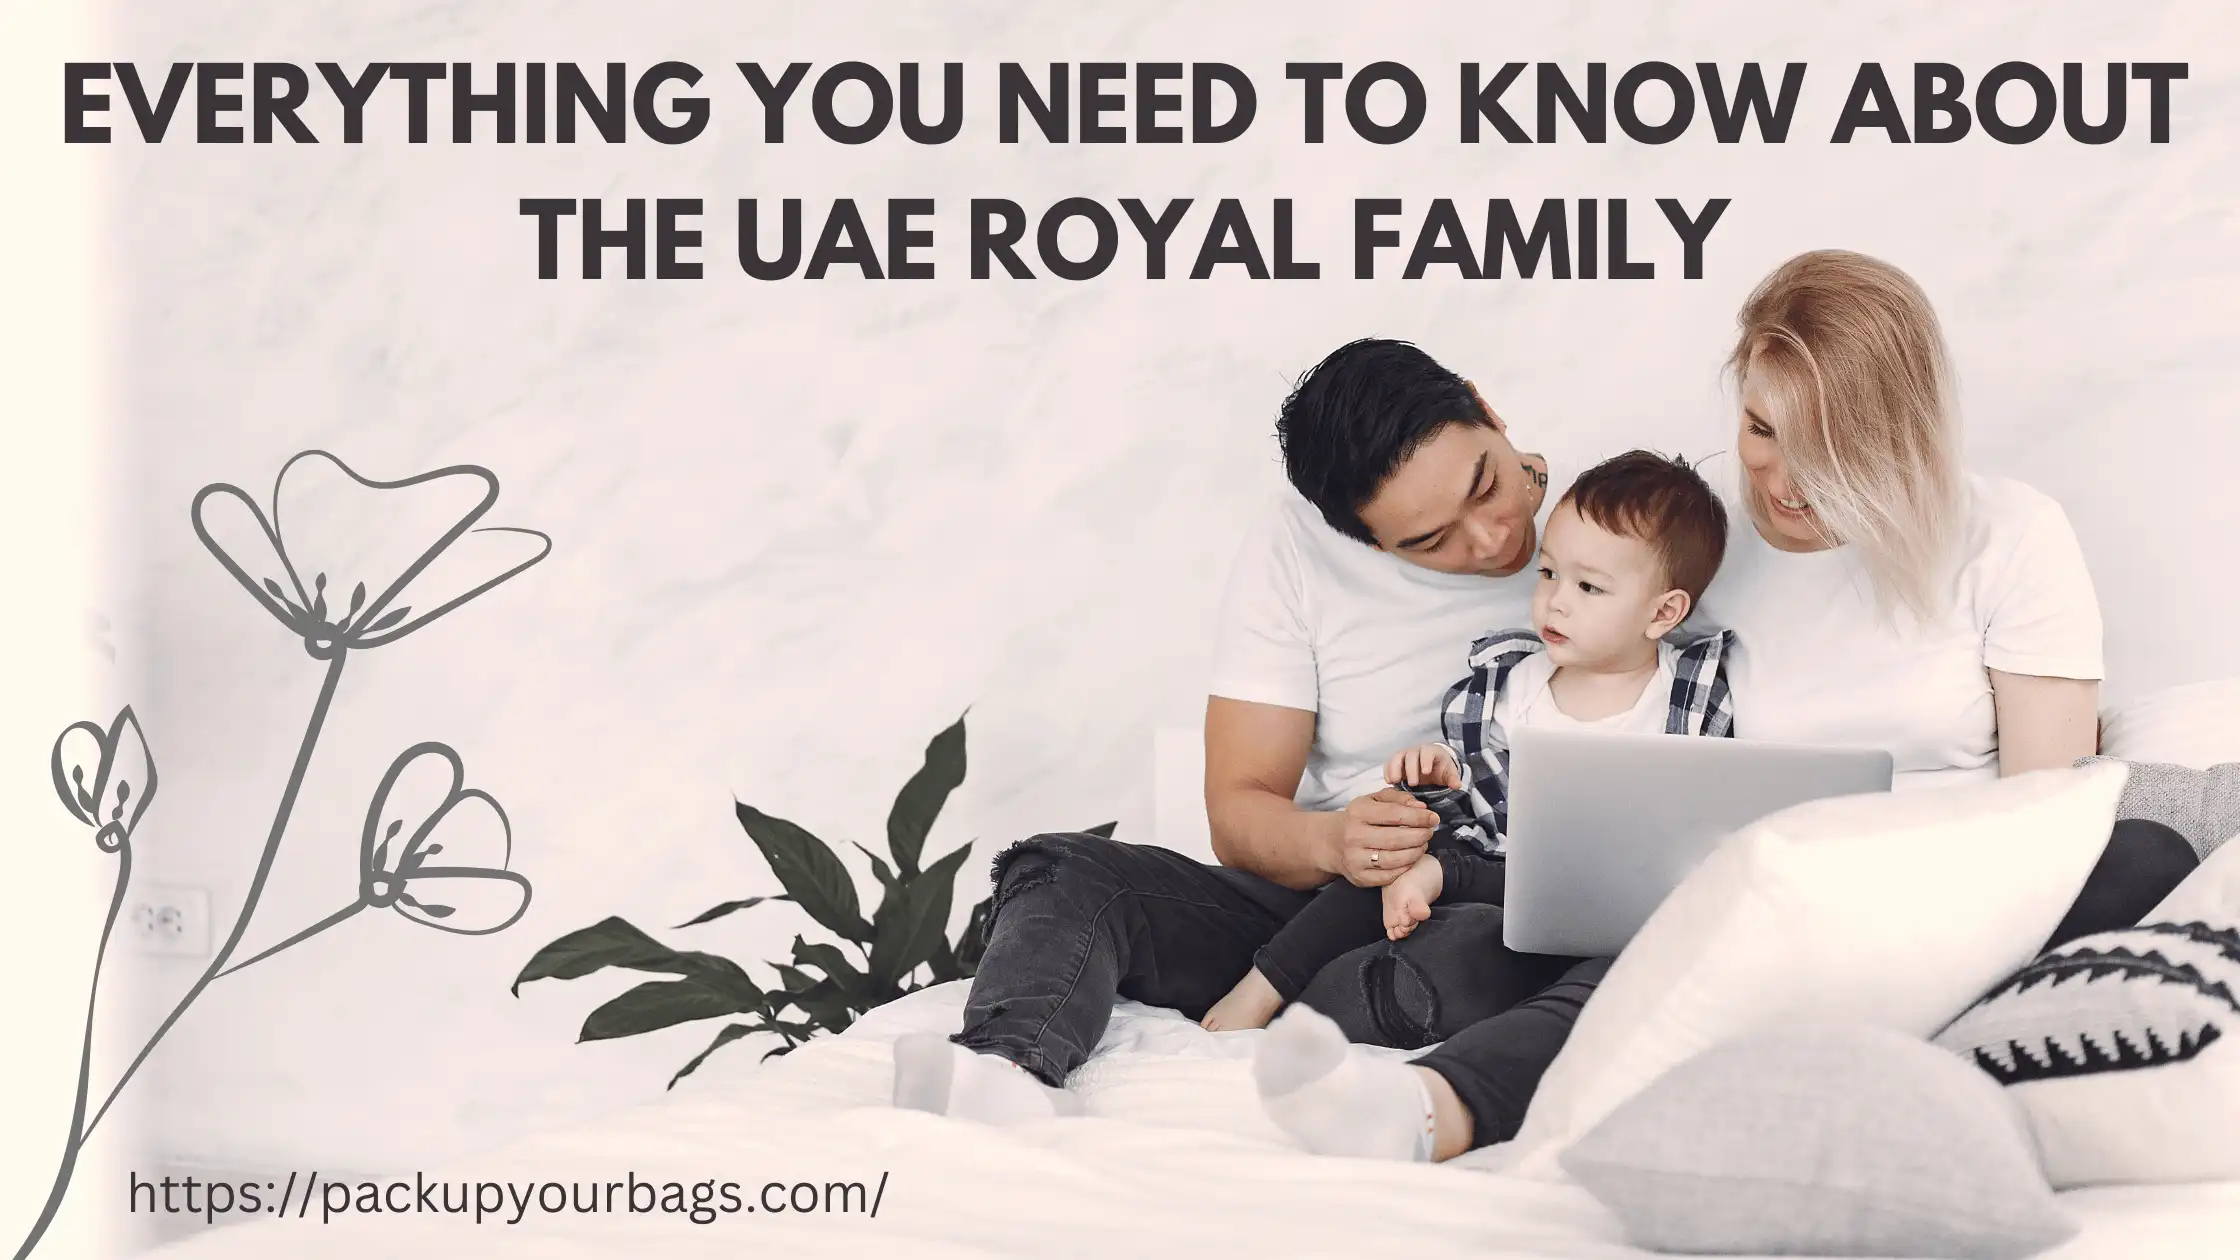 Everything you need to know about the UAE royal family